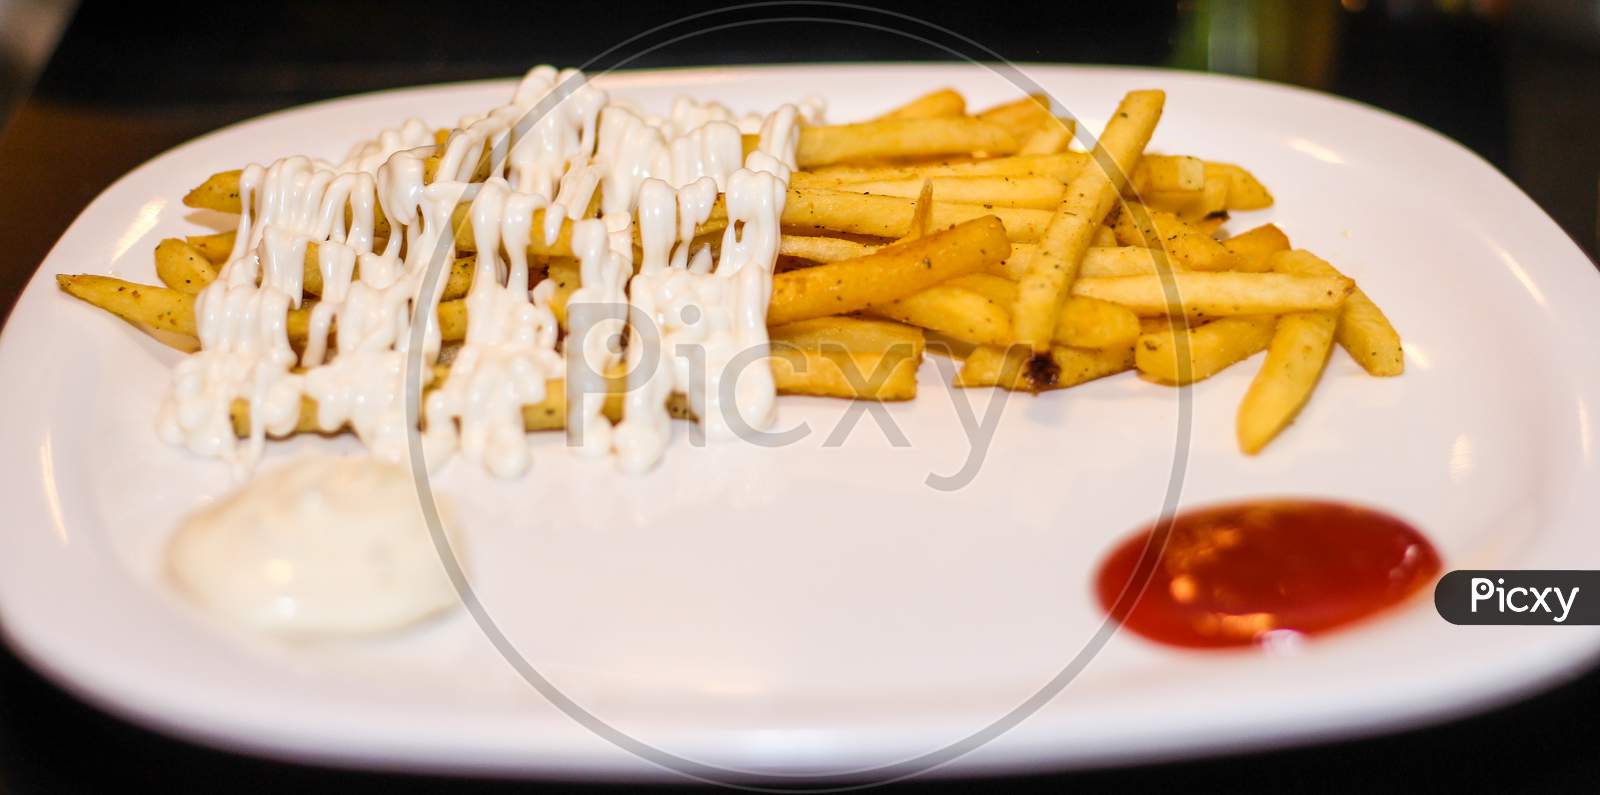 French Fries With Mayonnaise And Tomato Ketchup.